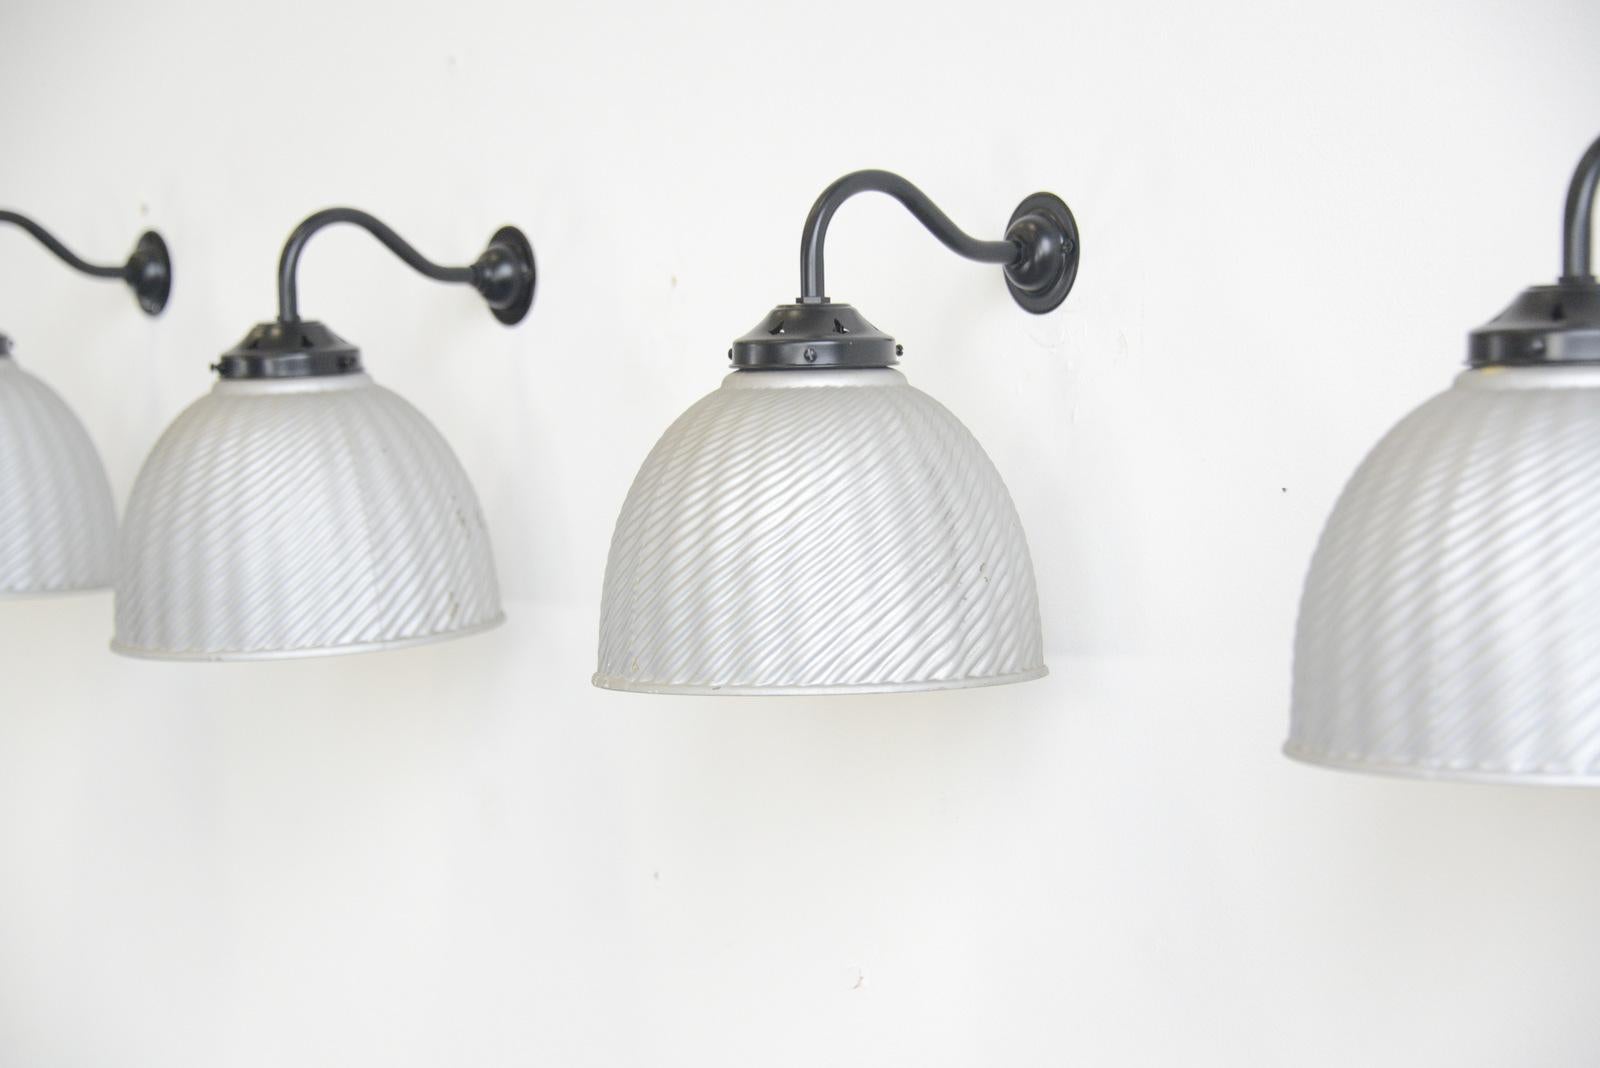 Large wall-mounted mercury glass lights, circa 1930s

- Price is per light
- Ornate mercury shades
- Original silver paint on the outside
- Black steel wall brackets
- Takes E27 fitting bulbs
- Czech ~ 1930s
- Measures: 24cm wide x 27cm deep